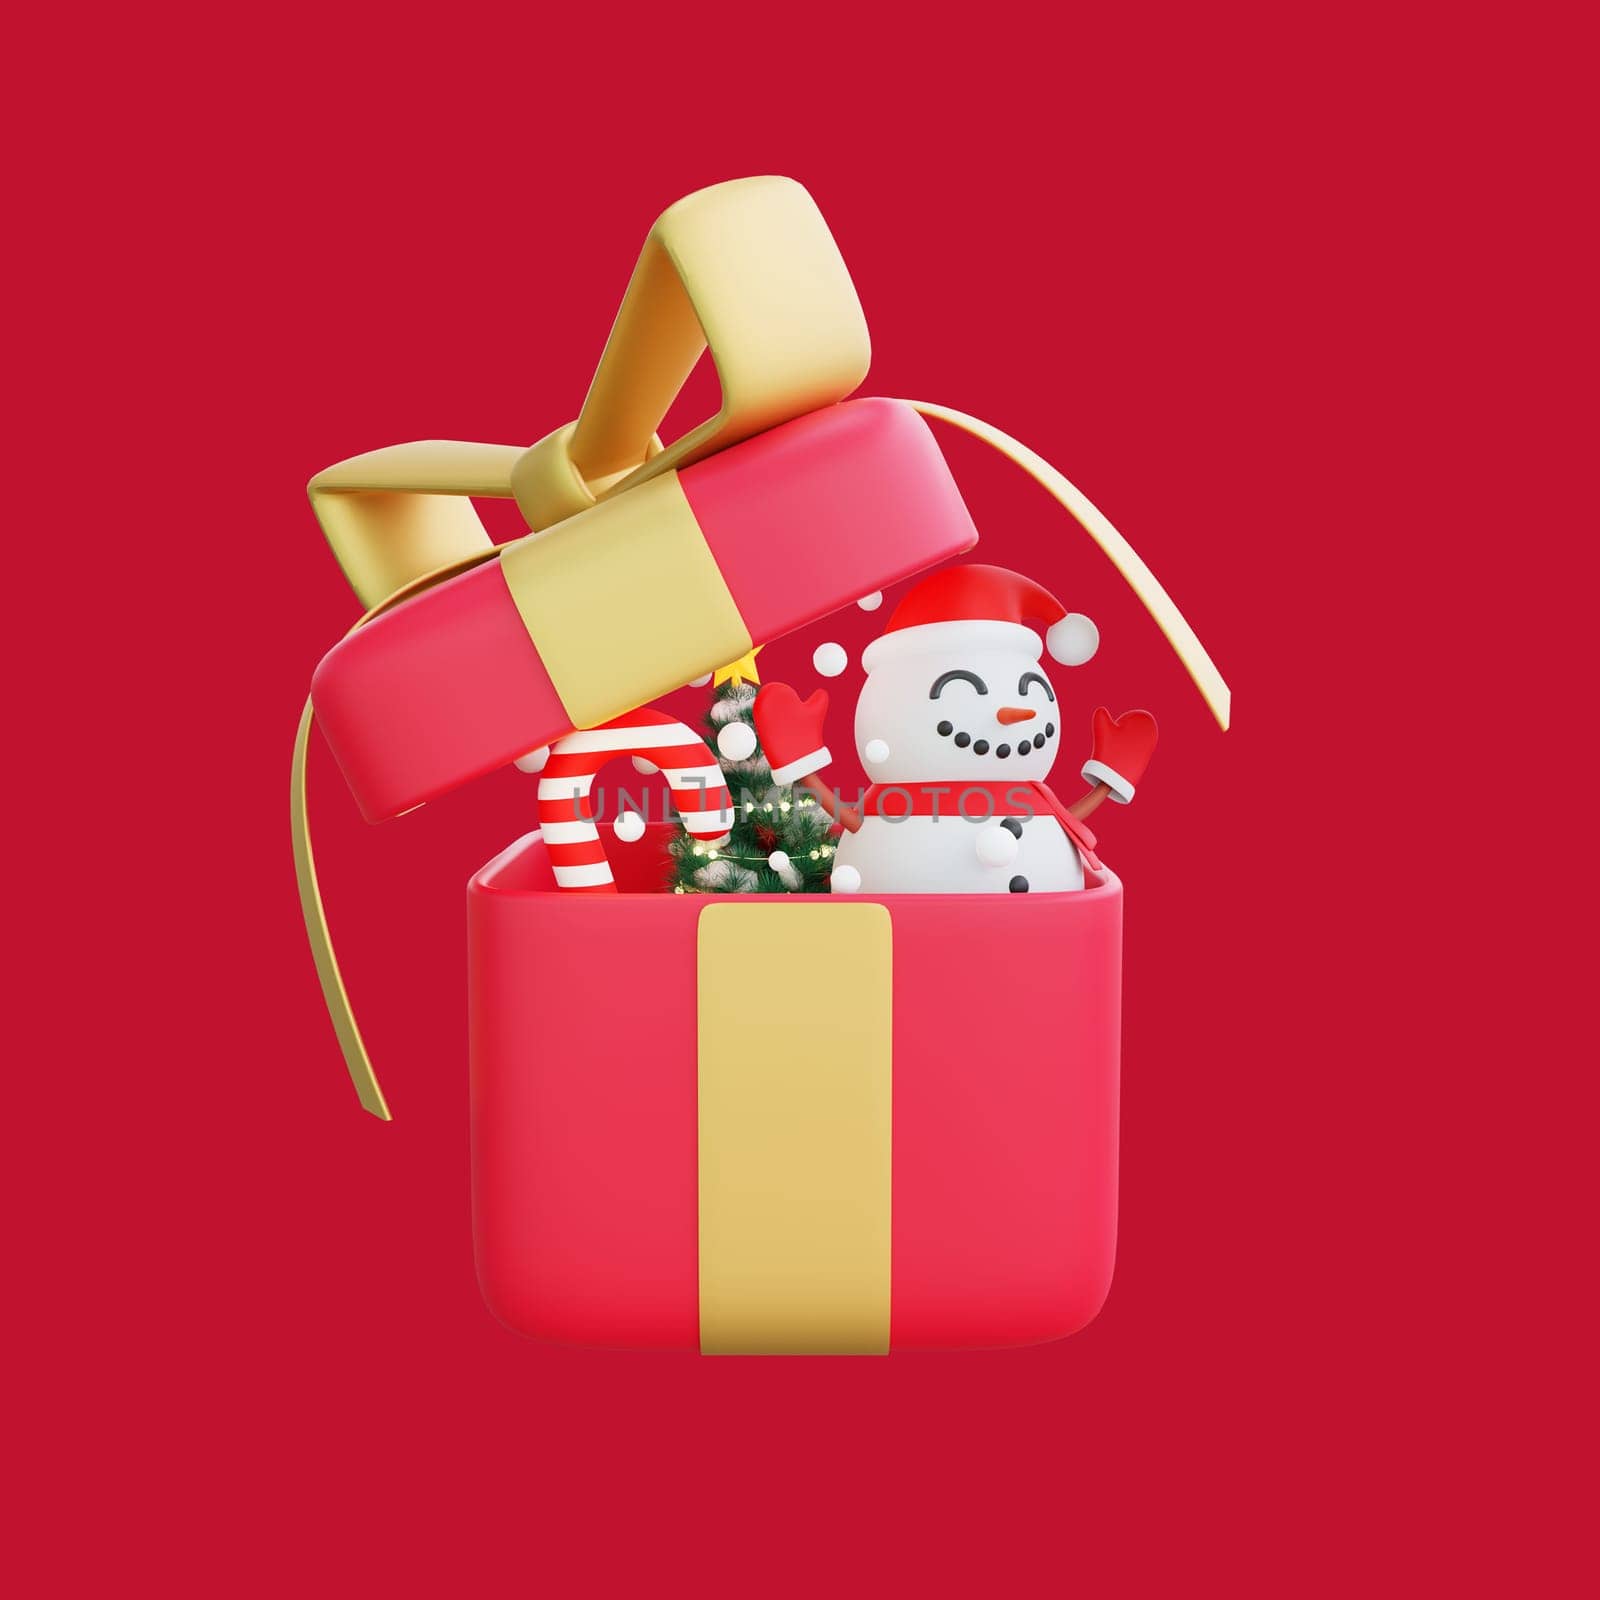 3D illustration of a festive red gift box with a gold ribbon, revealing a cheerful snowman, Christmas tree, and a candy cane inside. Perfect for Christmas and Happy New Year celebrations